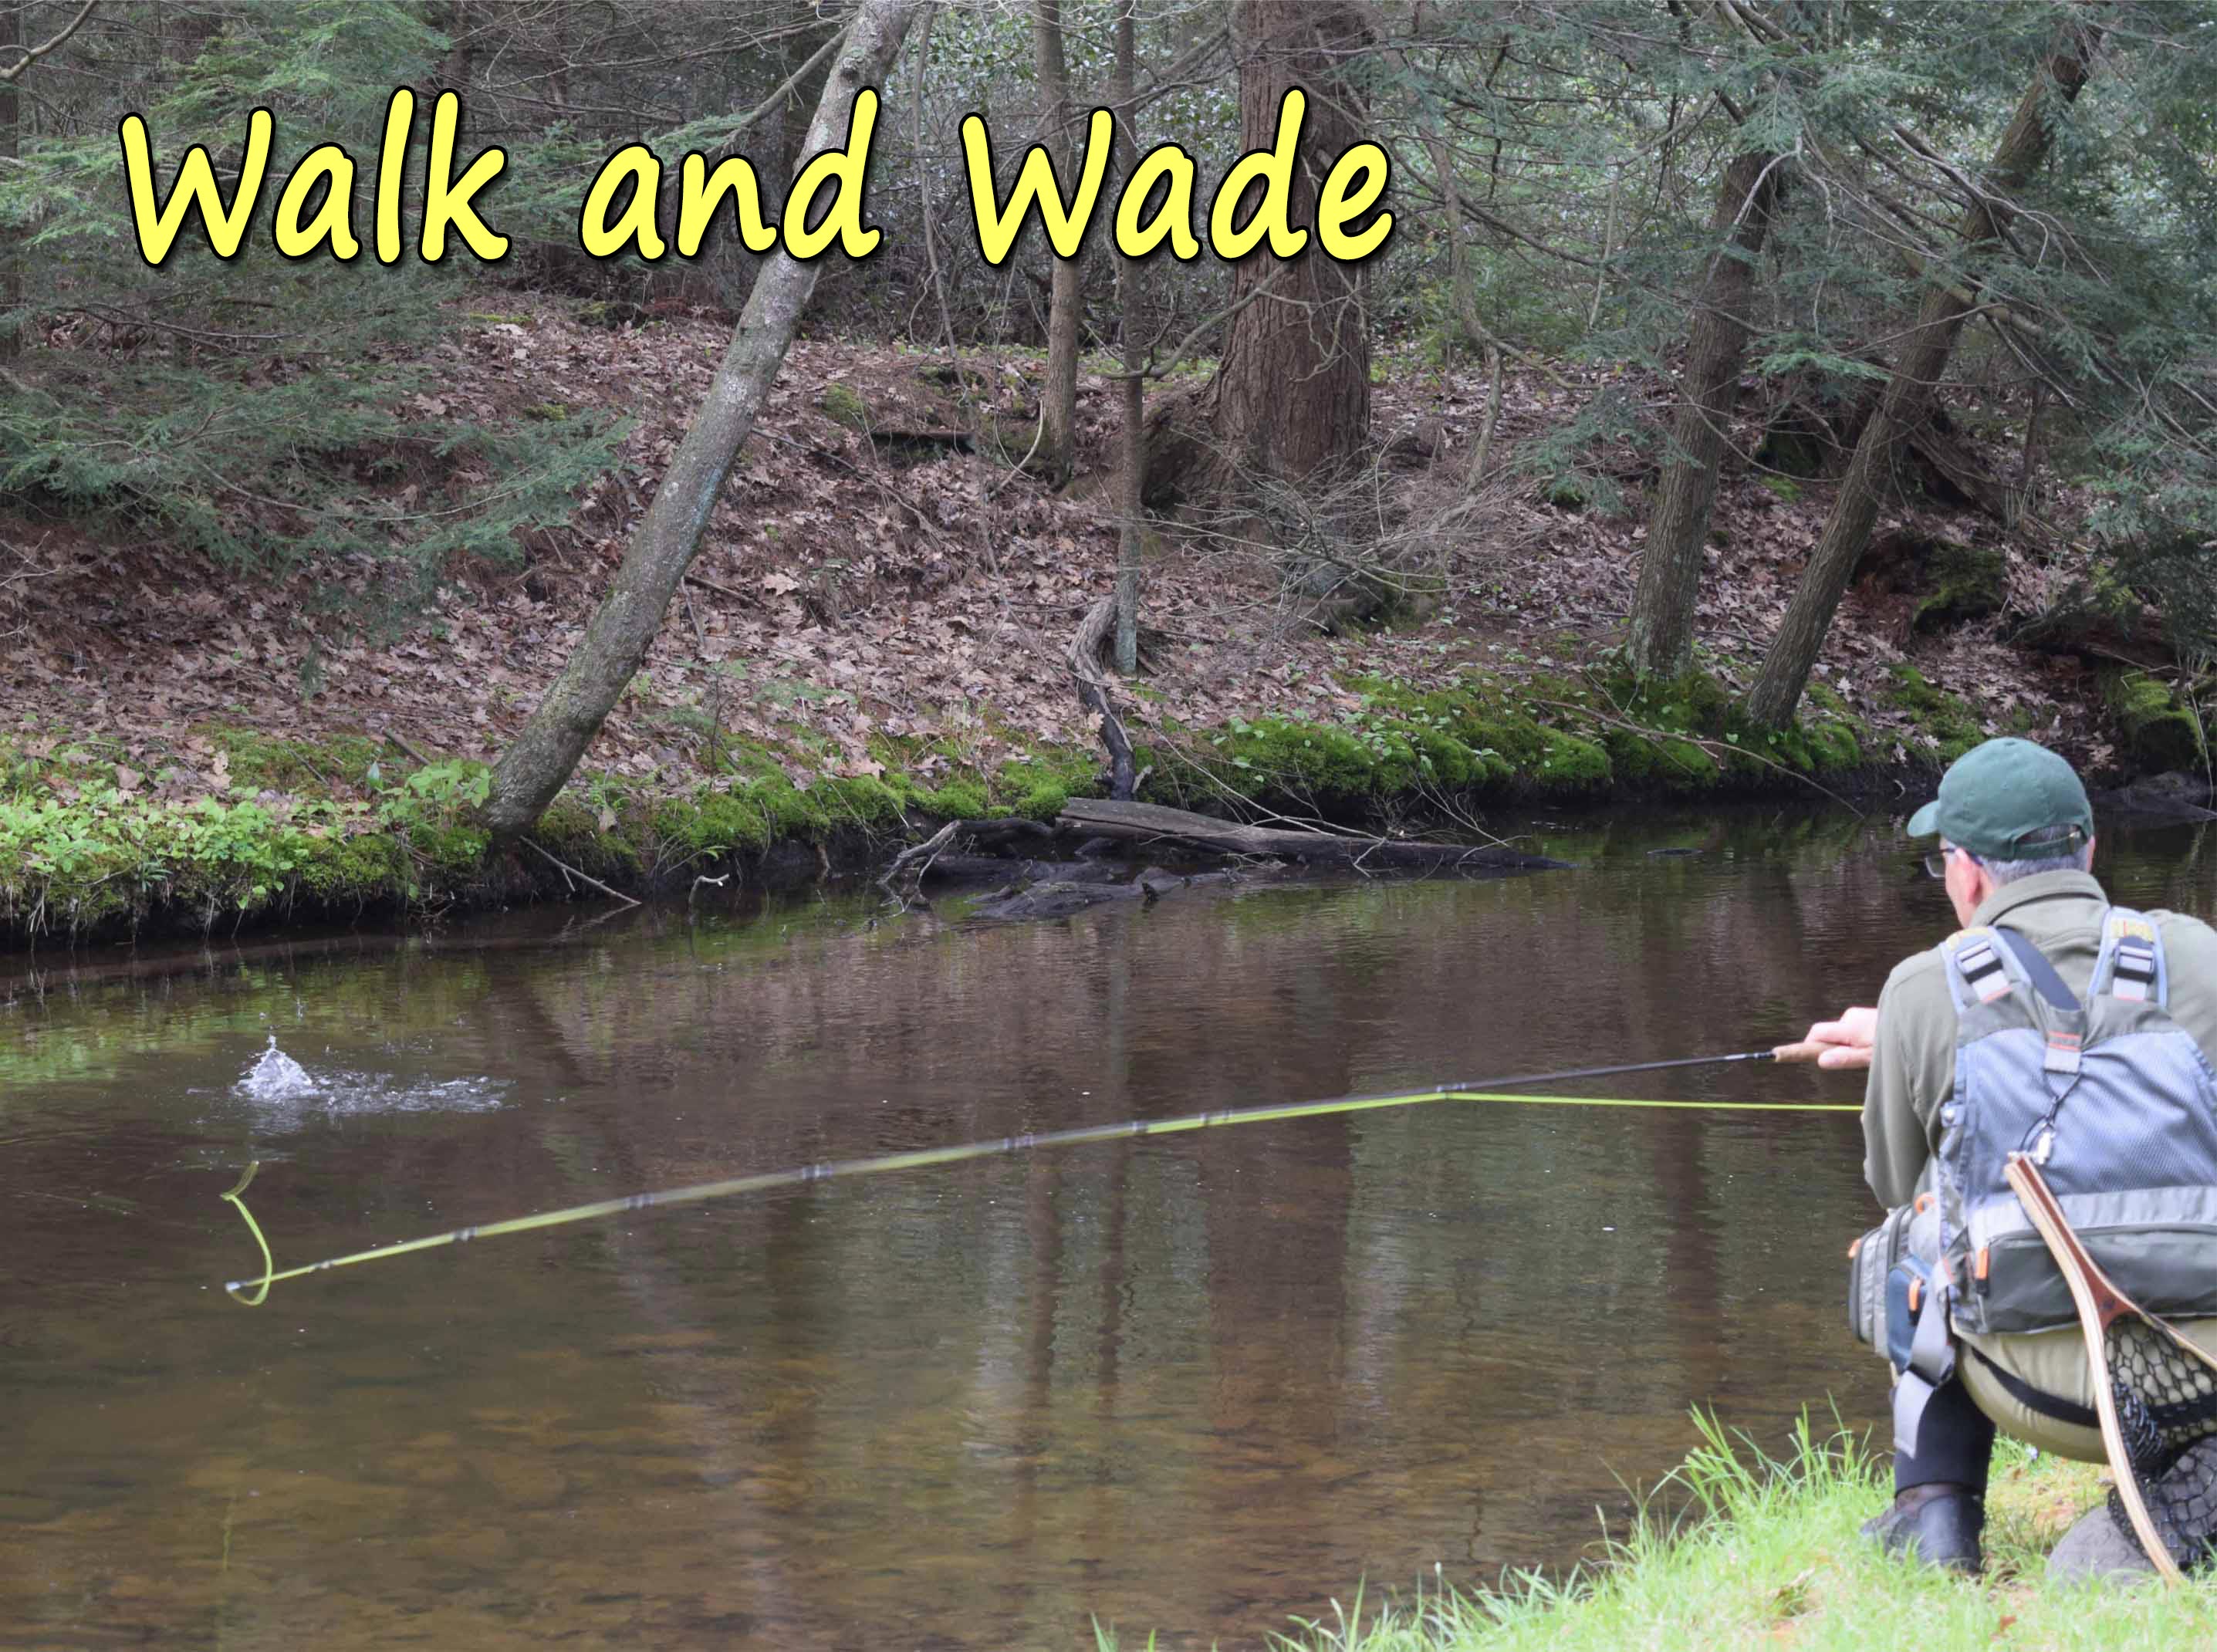 Walk and Wade Day Trips on Penns, Spring, Pine, Kettle, Little Juniata, Lehigh, Tulpehocken, Manatawny, Pohopoco and Lackawanna just to name a few of the stream we guide on in PA